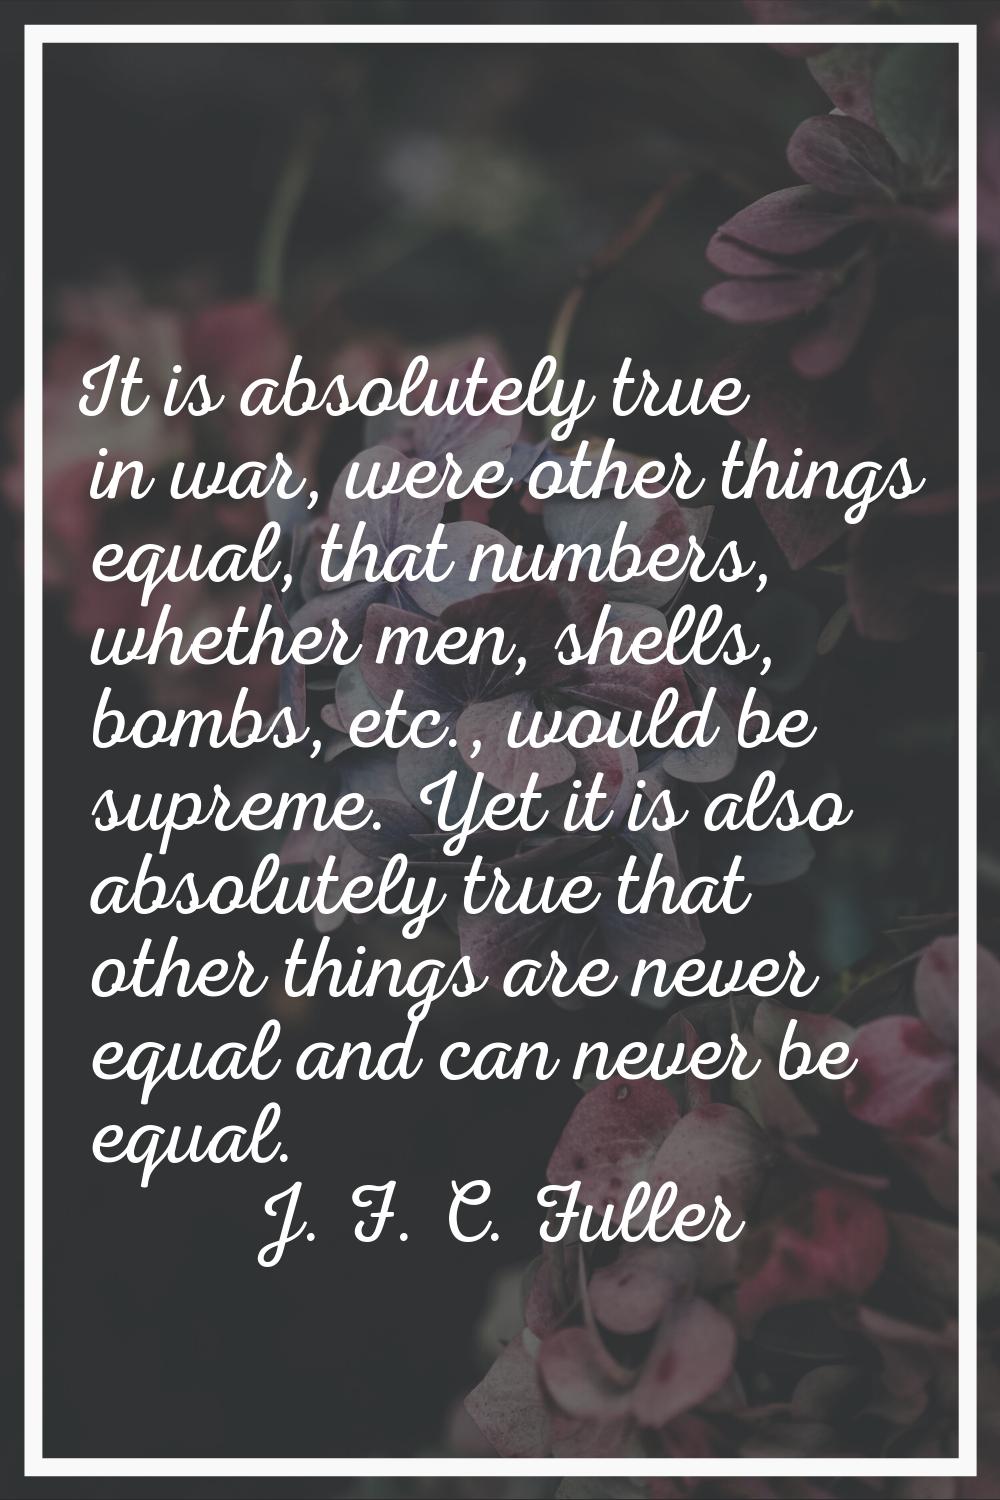 It is absolutely true in war, were other things equal, that numbers, whether men, shells, bombs, et